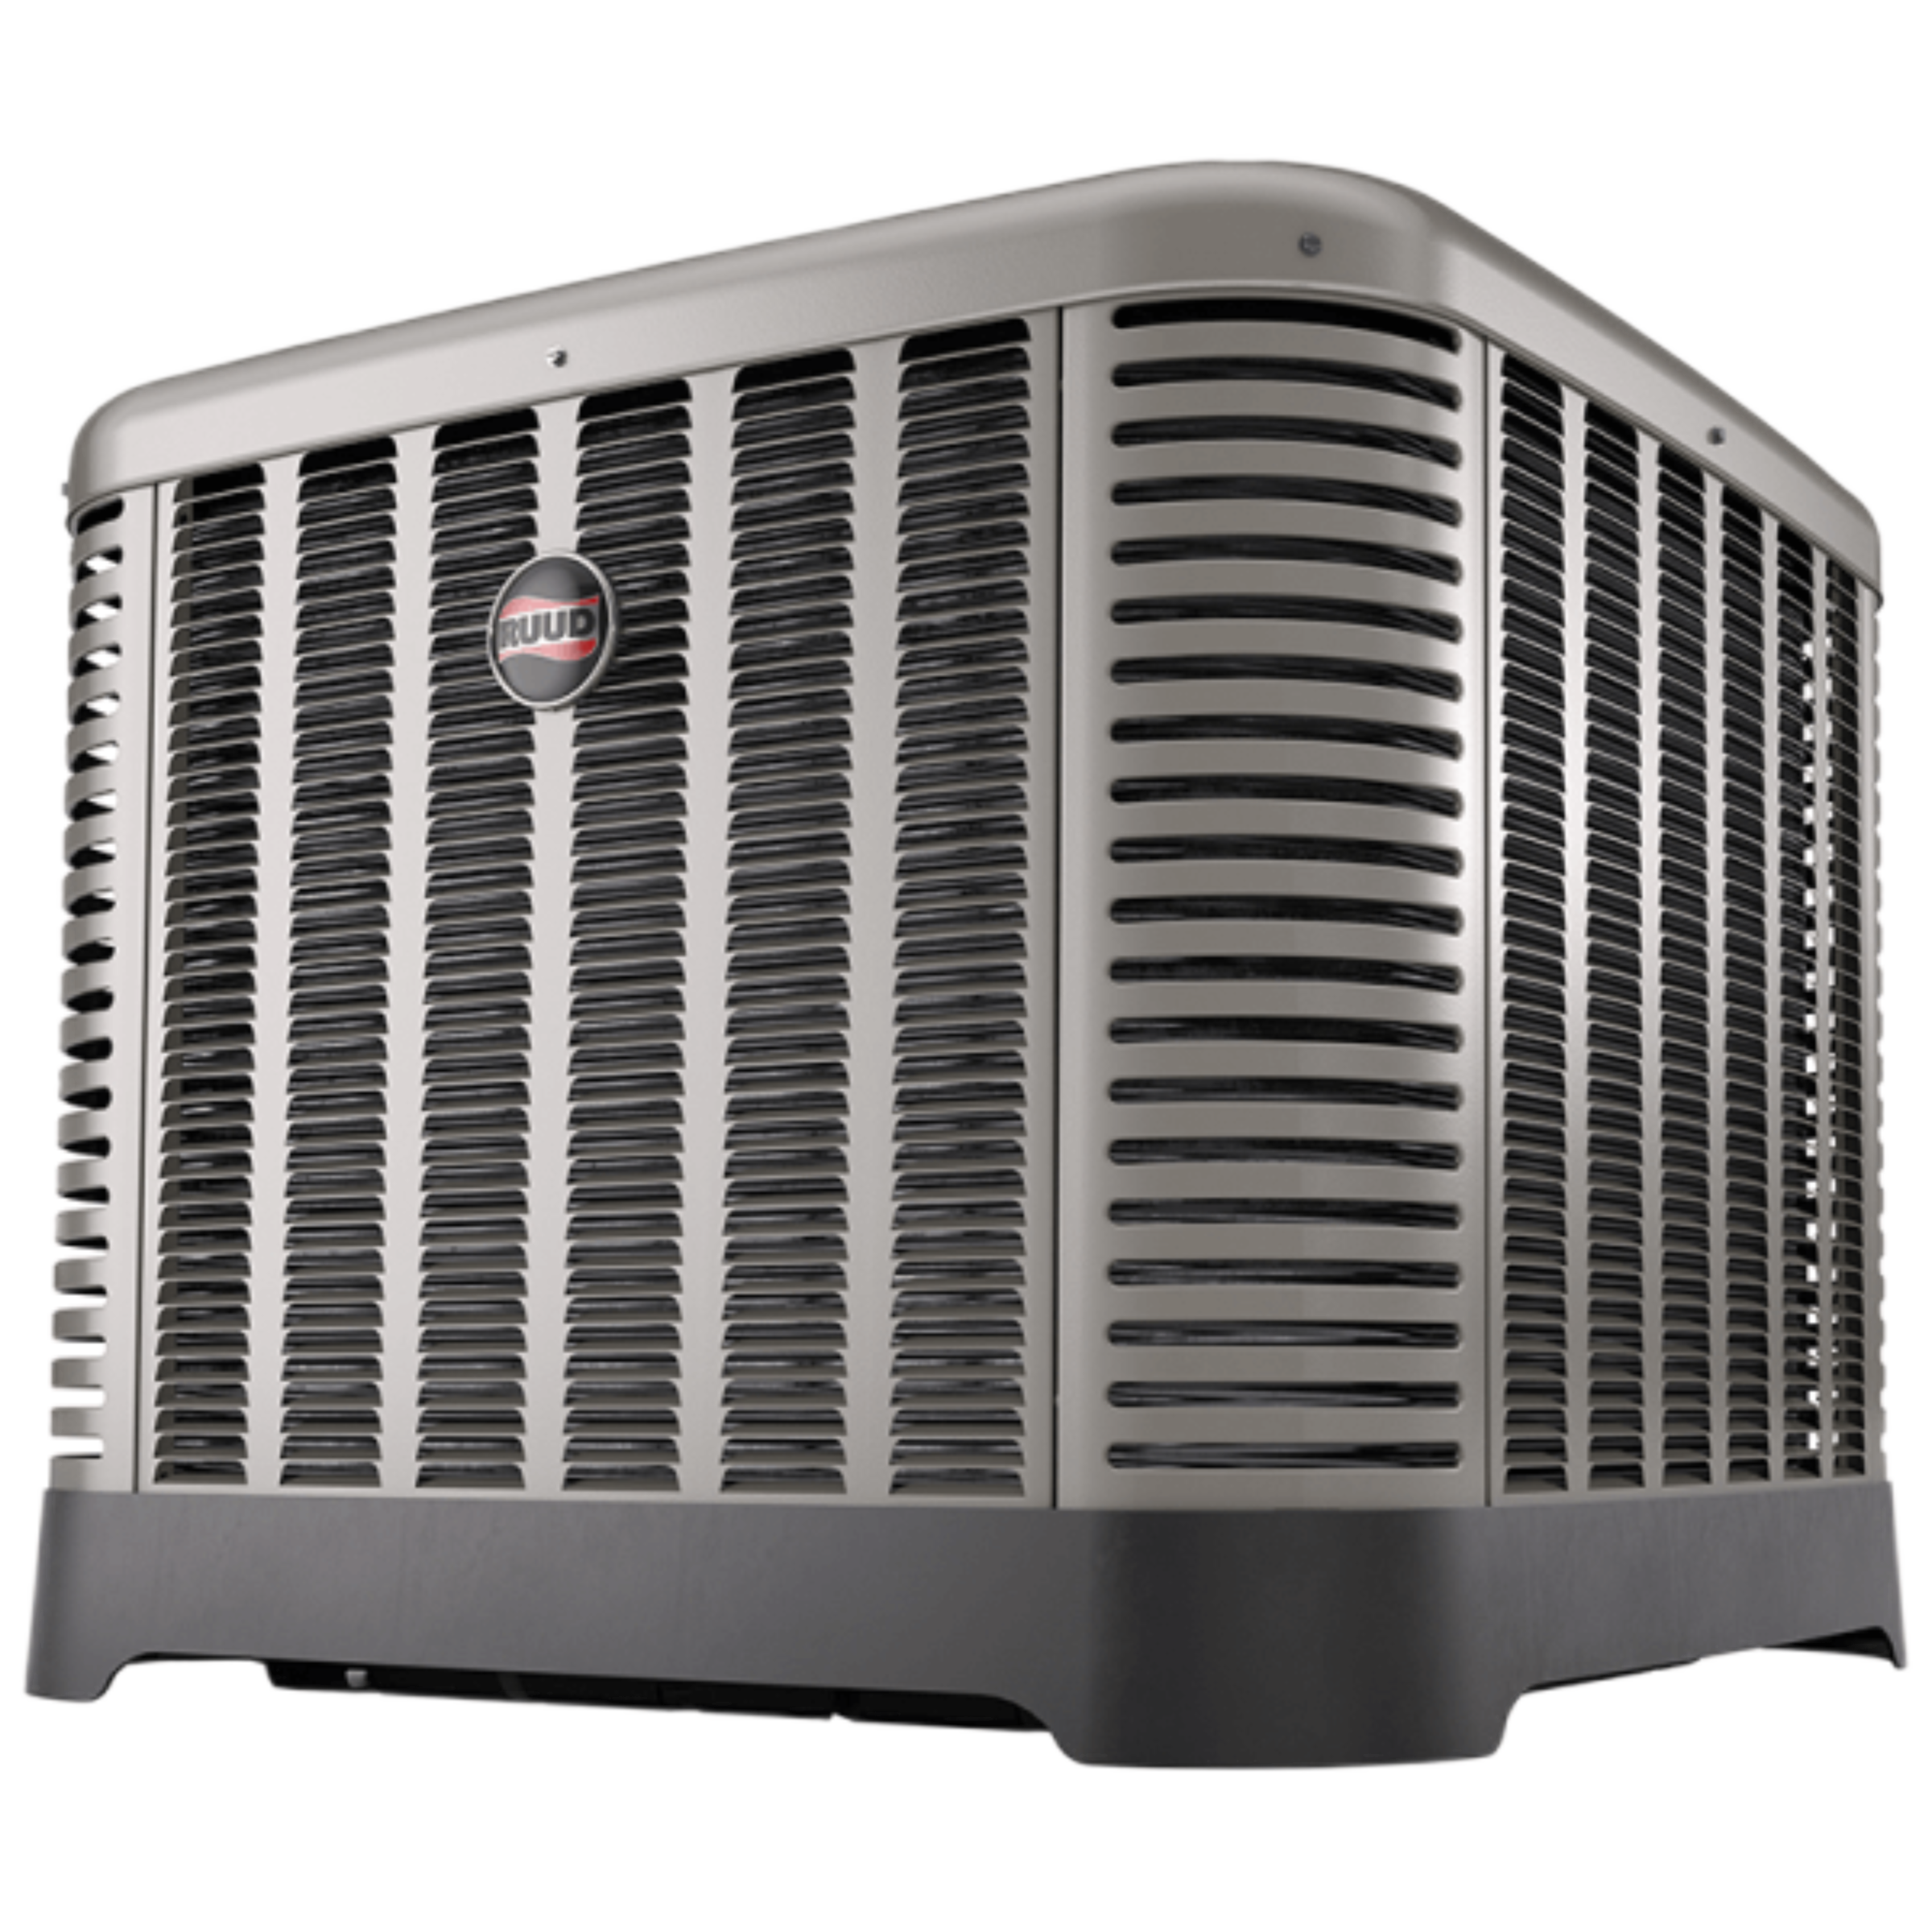 RA16 Ruud Achiever Series Single Stage Air Conditioning Condensing Unit 16 SEER/13 EER, 1 1/2 to 5 Tons, Cooling Capacities 17.3 to 60.5 kBTU, 208-230V/1Ph/60Hz